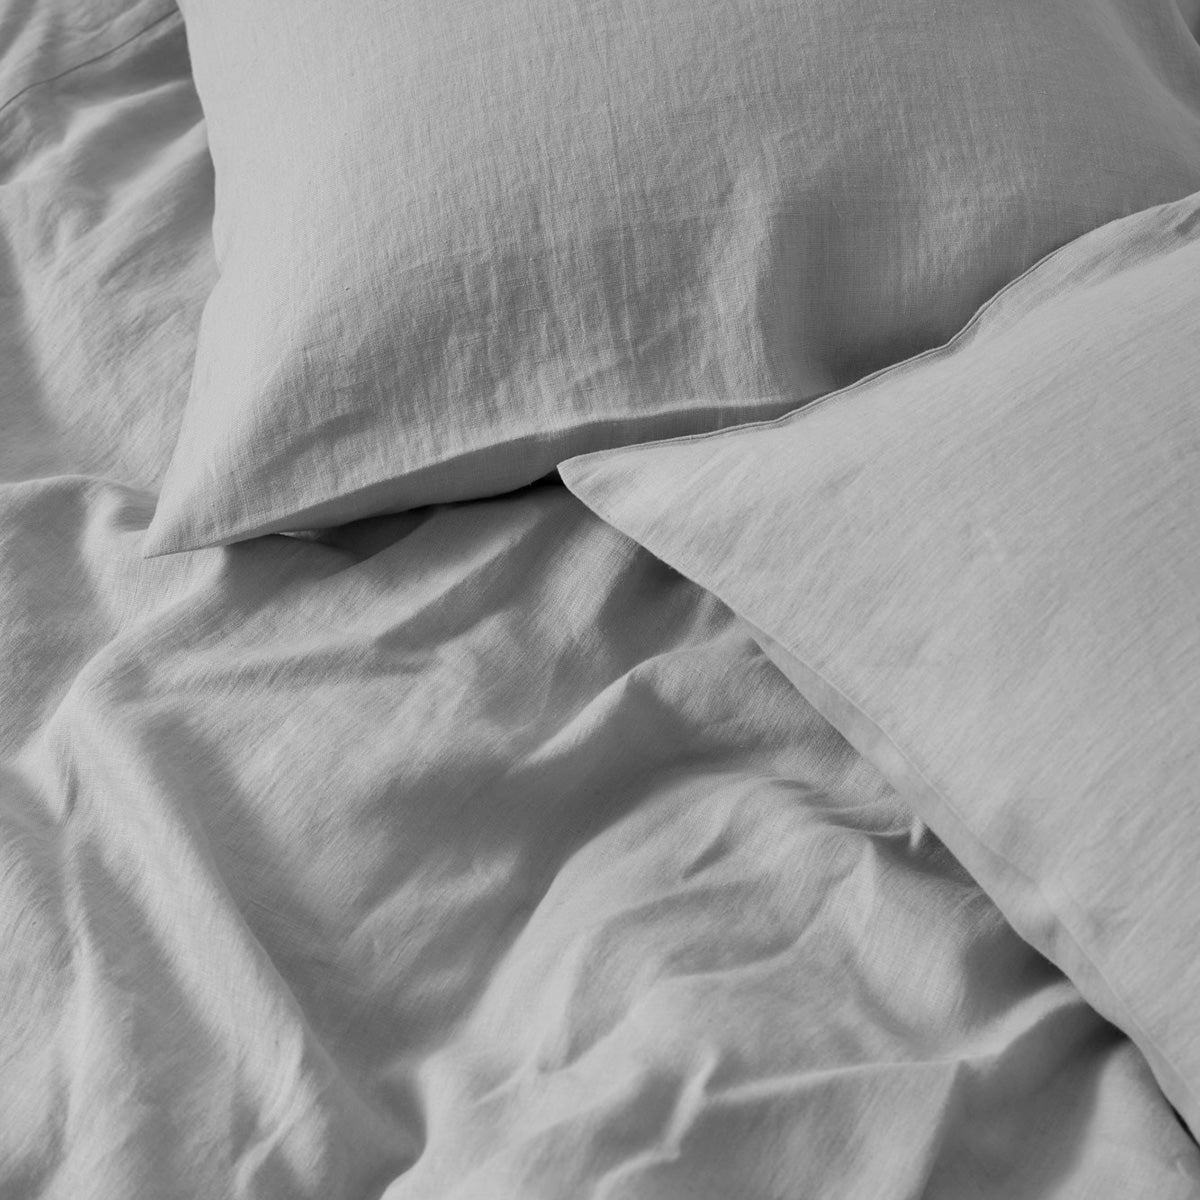 Linen Duvet Cover and Linen Pillow Covers in Frosty Neutral